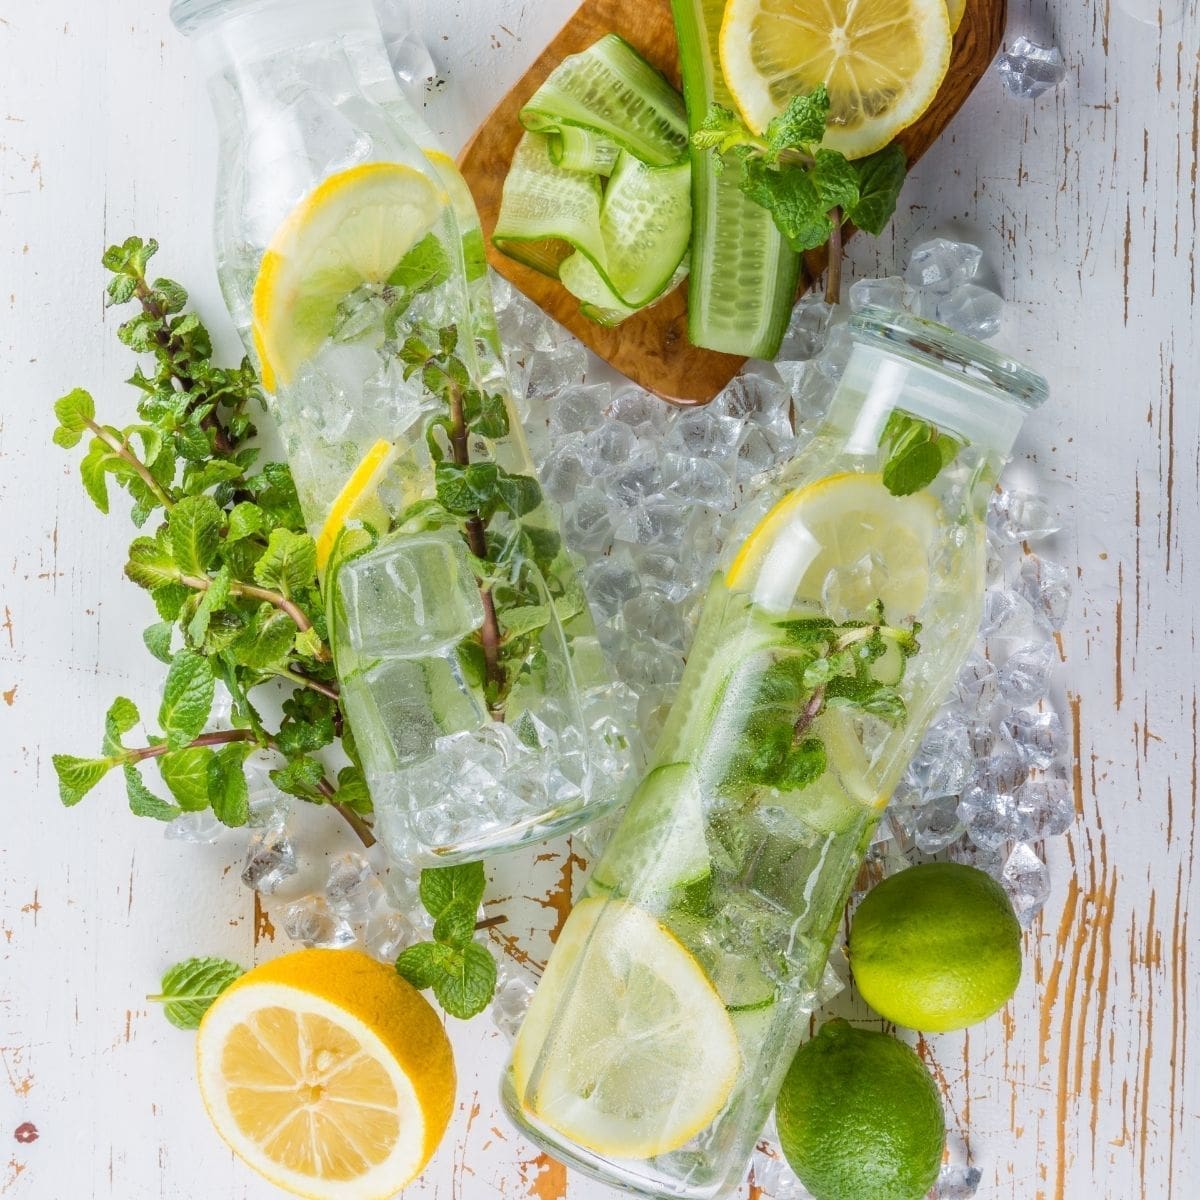 25 BEST Infused Water Recipes To Liven Up Your Plain Water! 💧